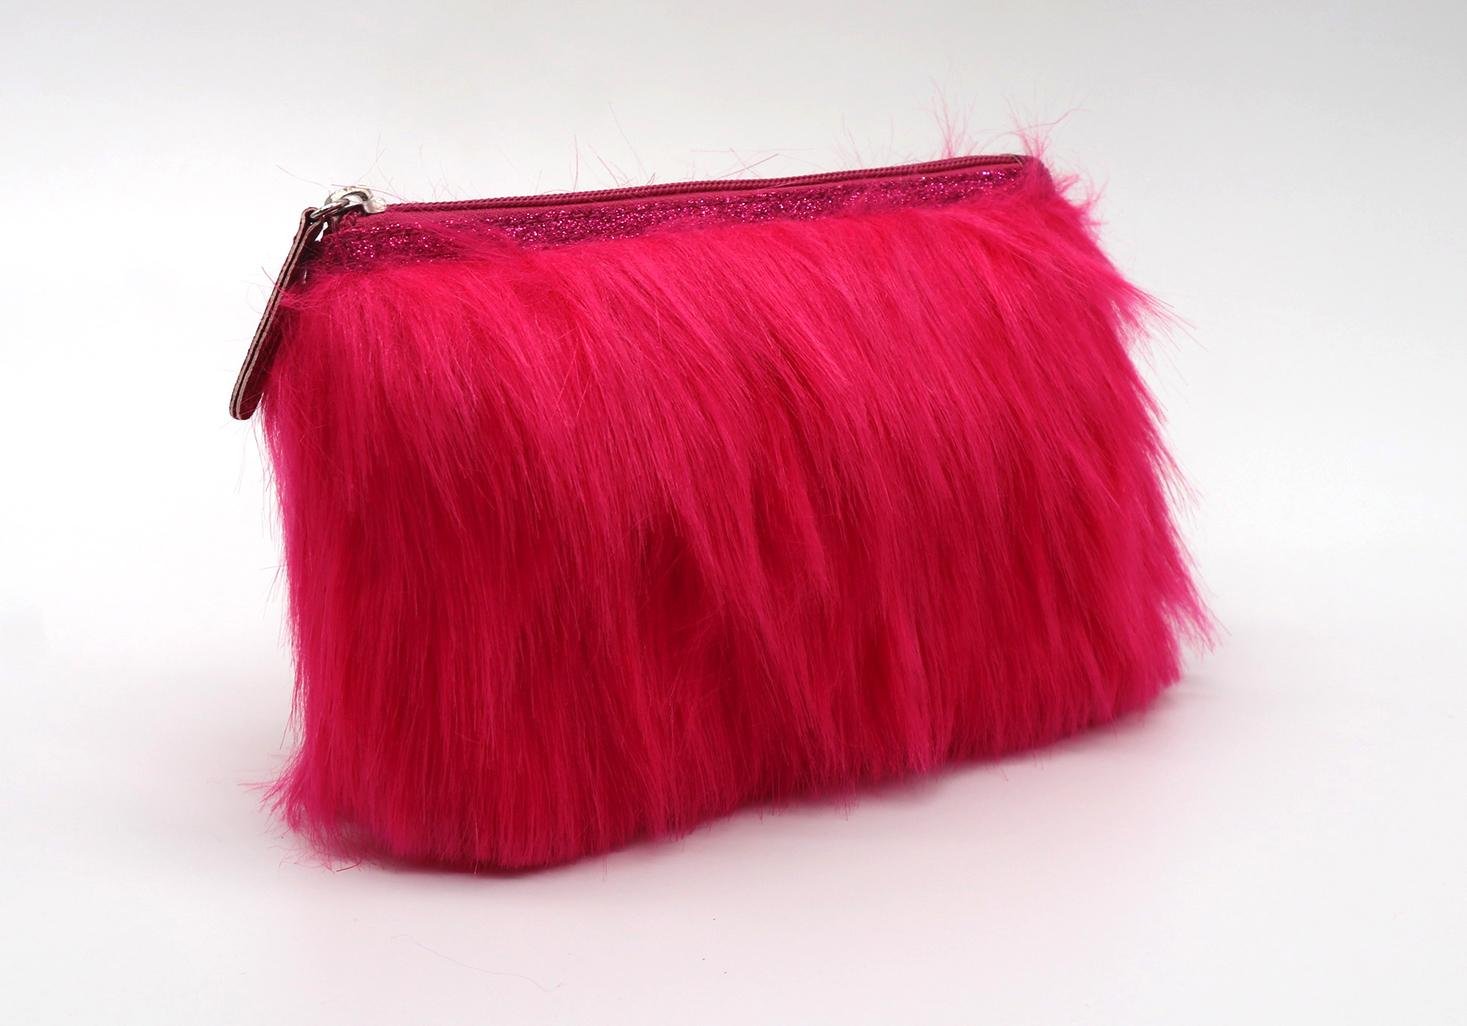 Fake fur cute lady makeup bag pink color with glitter band at top 2